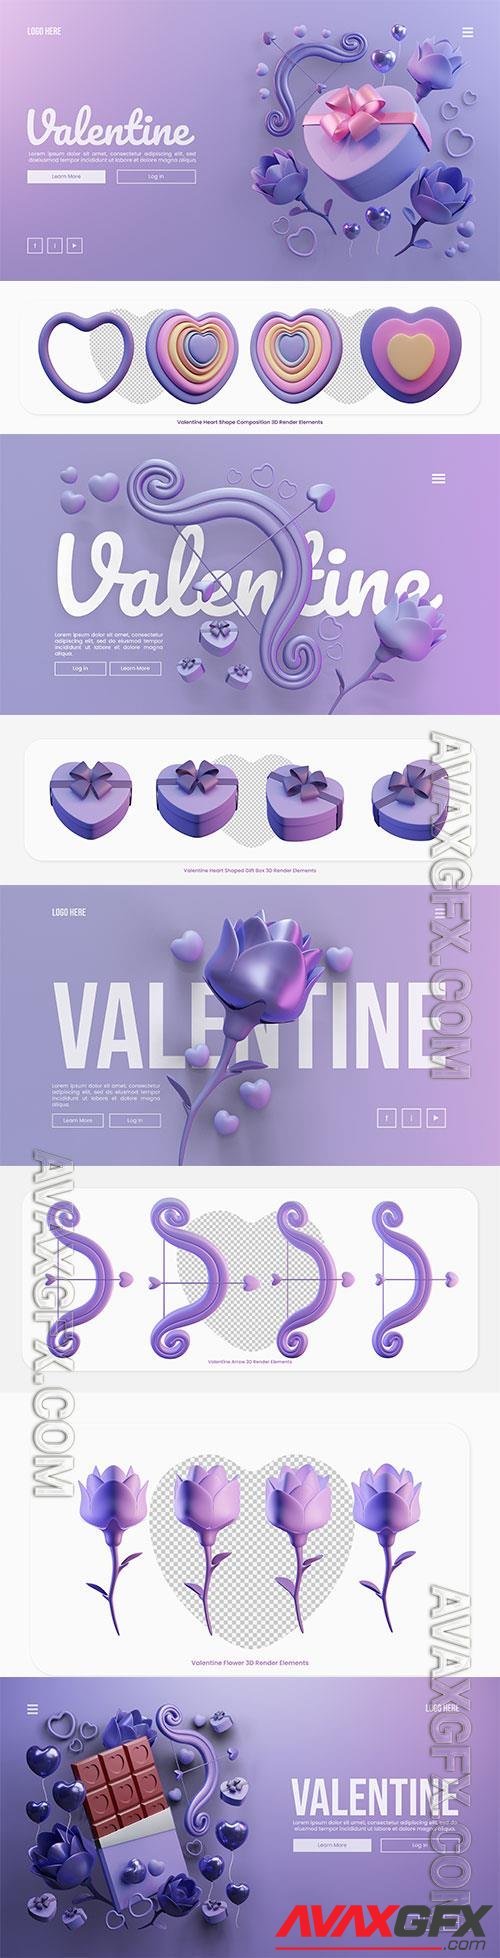 Valentine landing page template with heart shaped gift box 3d rendering illustration psd